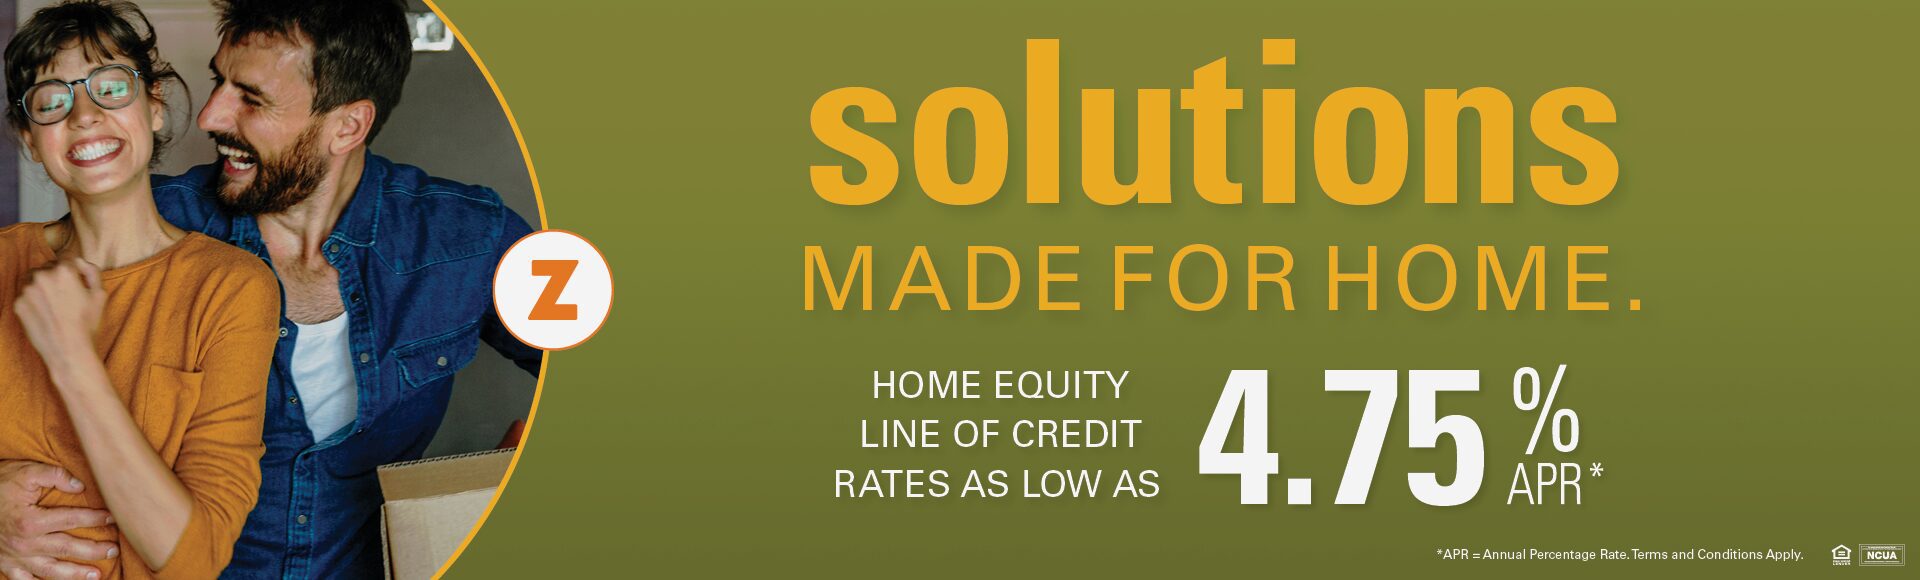 Solutions Made for Home. Home Equity Line of Credit Rates as low as 4.75% APR*